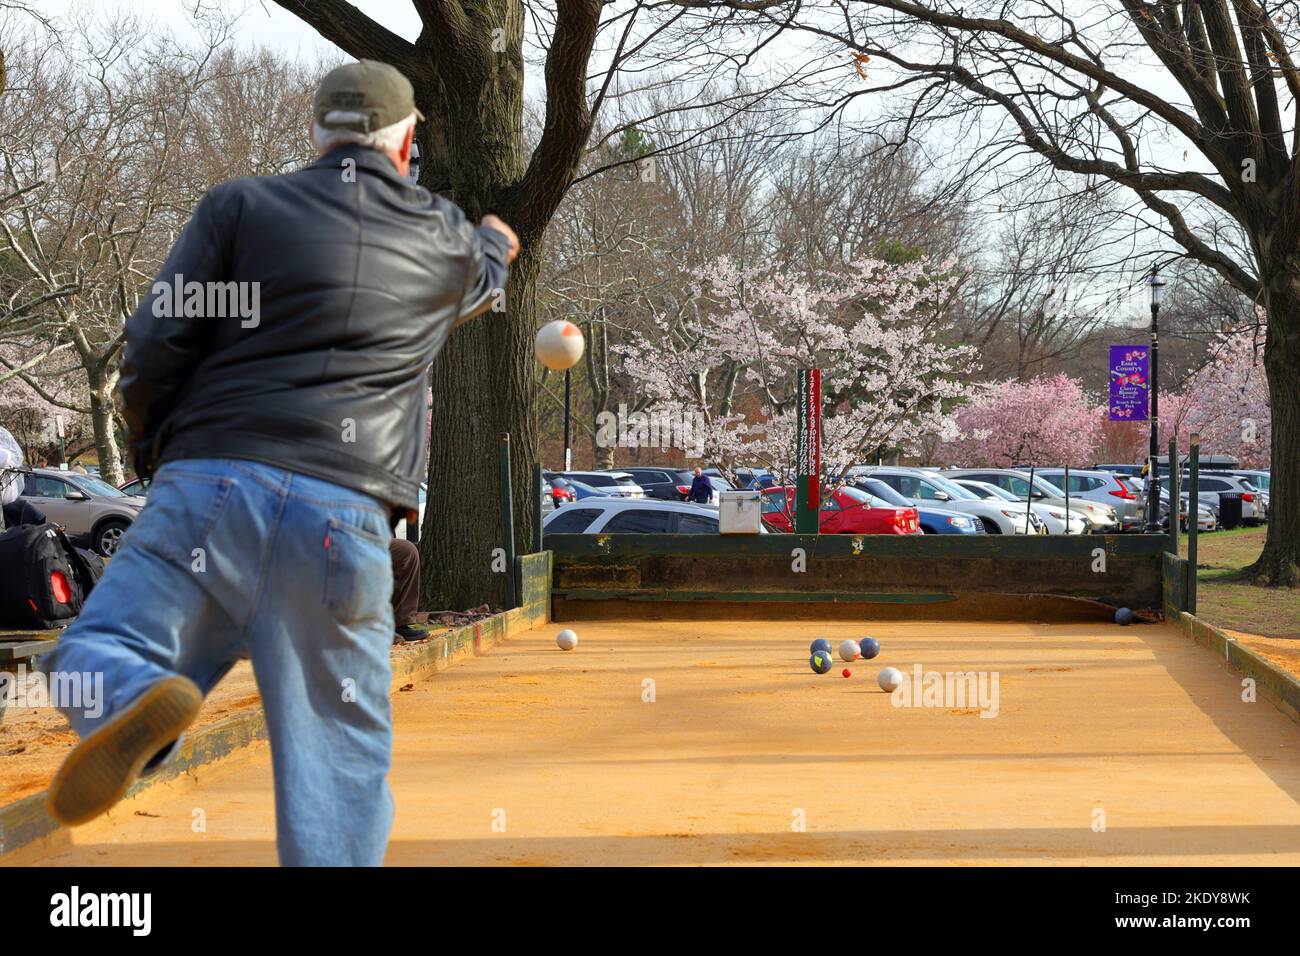 A person throws a bocce ball at an outdoor bocce court outside the Cherry Blossom Welcome Center in Branch Brook Park, Belleville, New Jersey. Stock Photo